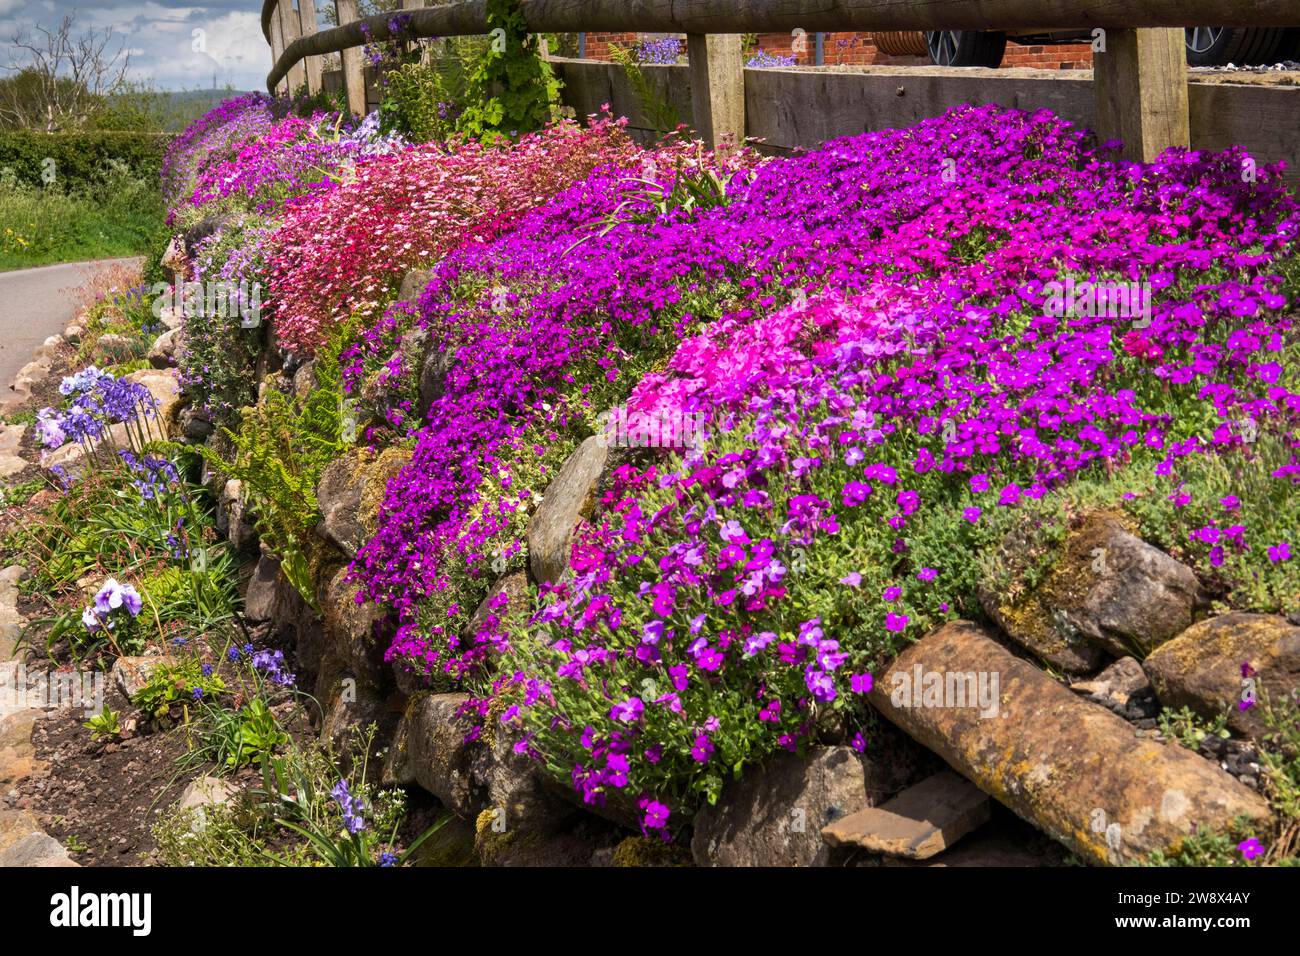 UK, England, Cheshire, Congleton, Puddle Bank Lane, colourful pink, purple and red early summer flowers in garden boundary wall Stock Photo